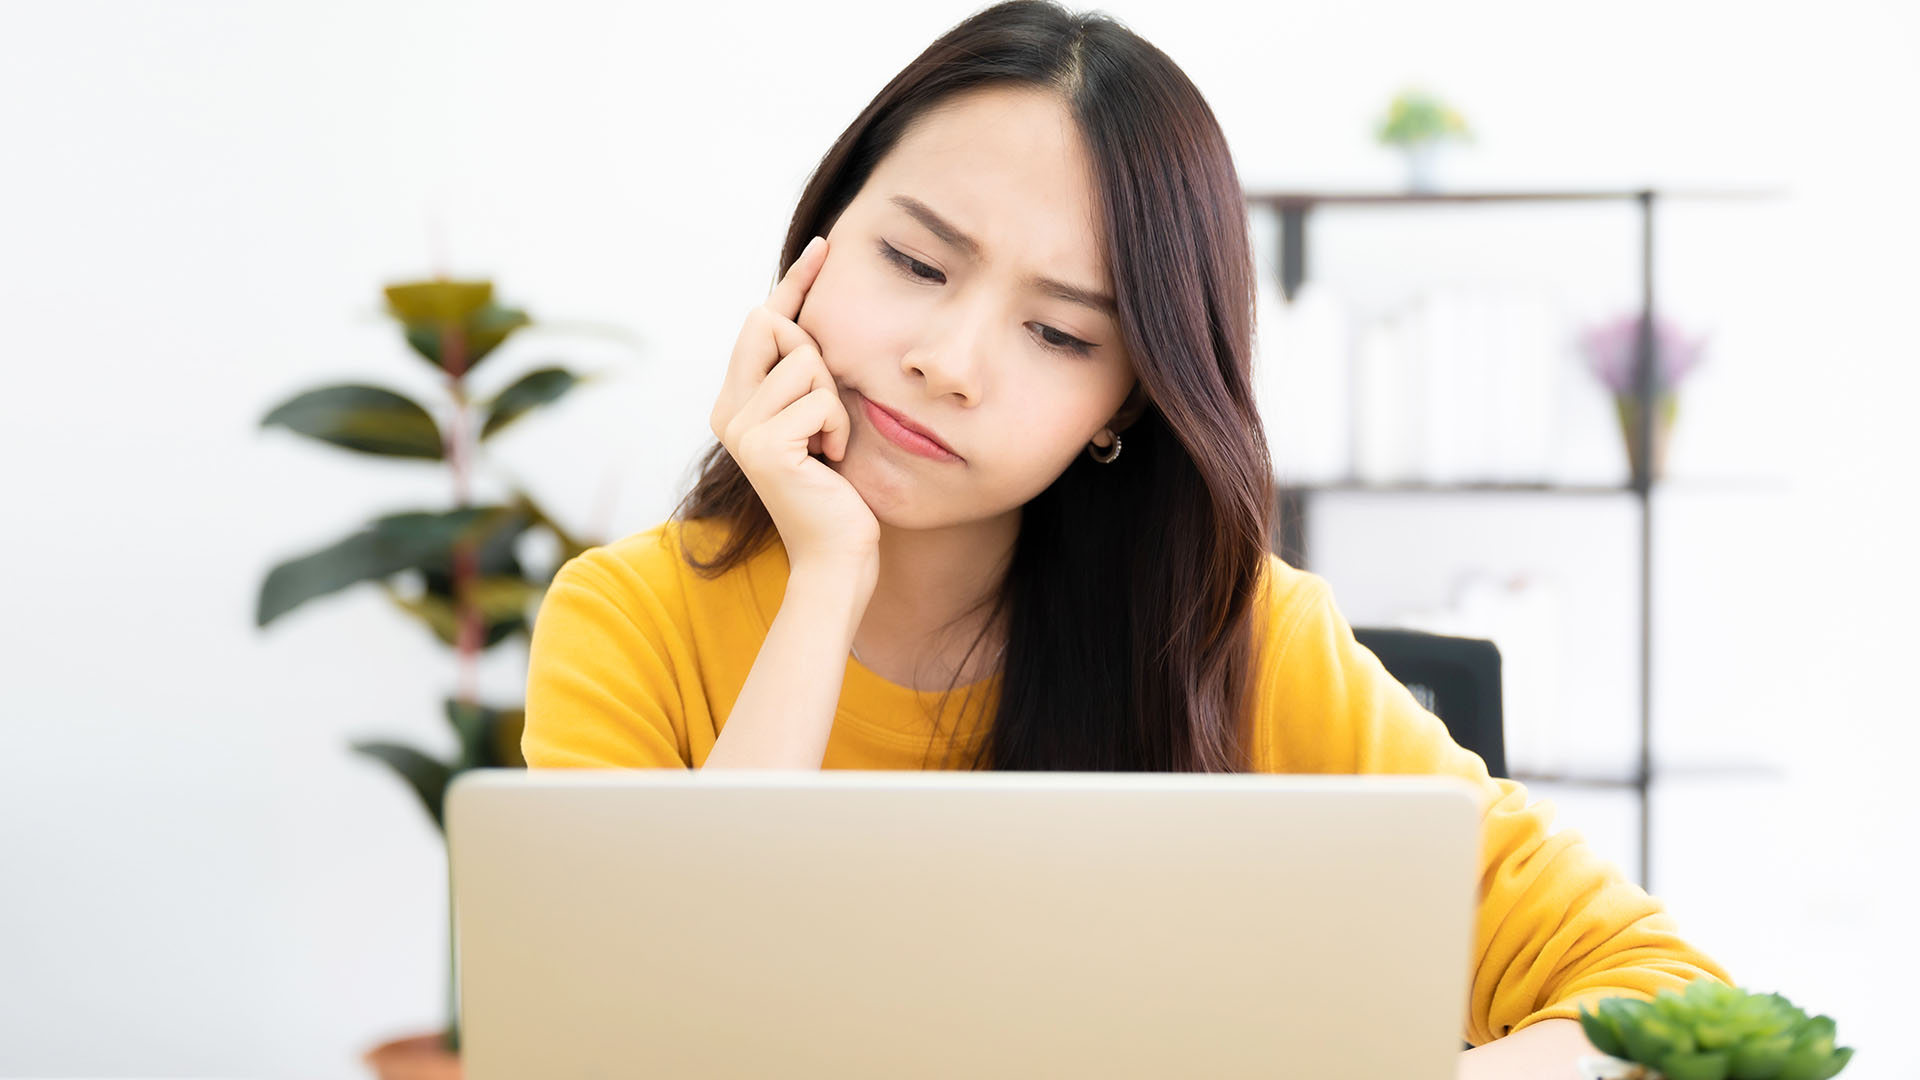 Brunette Asian woman in yellow long-sleeved shirt, sitting at desk and looking at her laptop confused. Plants in background.